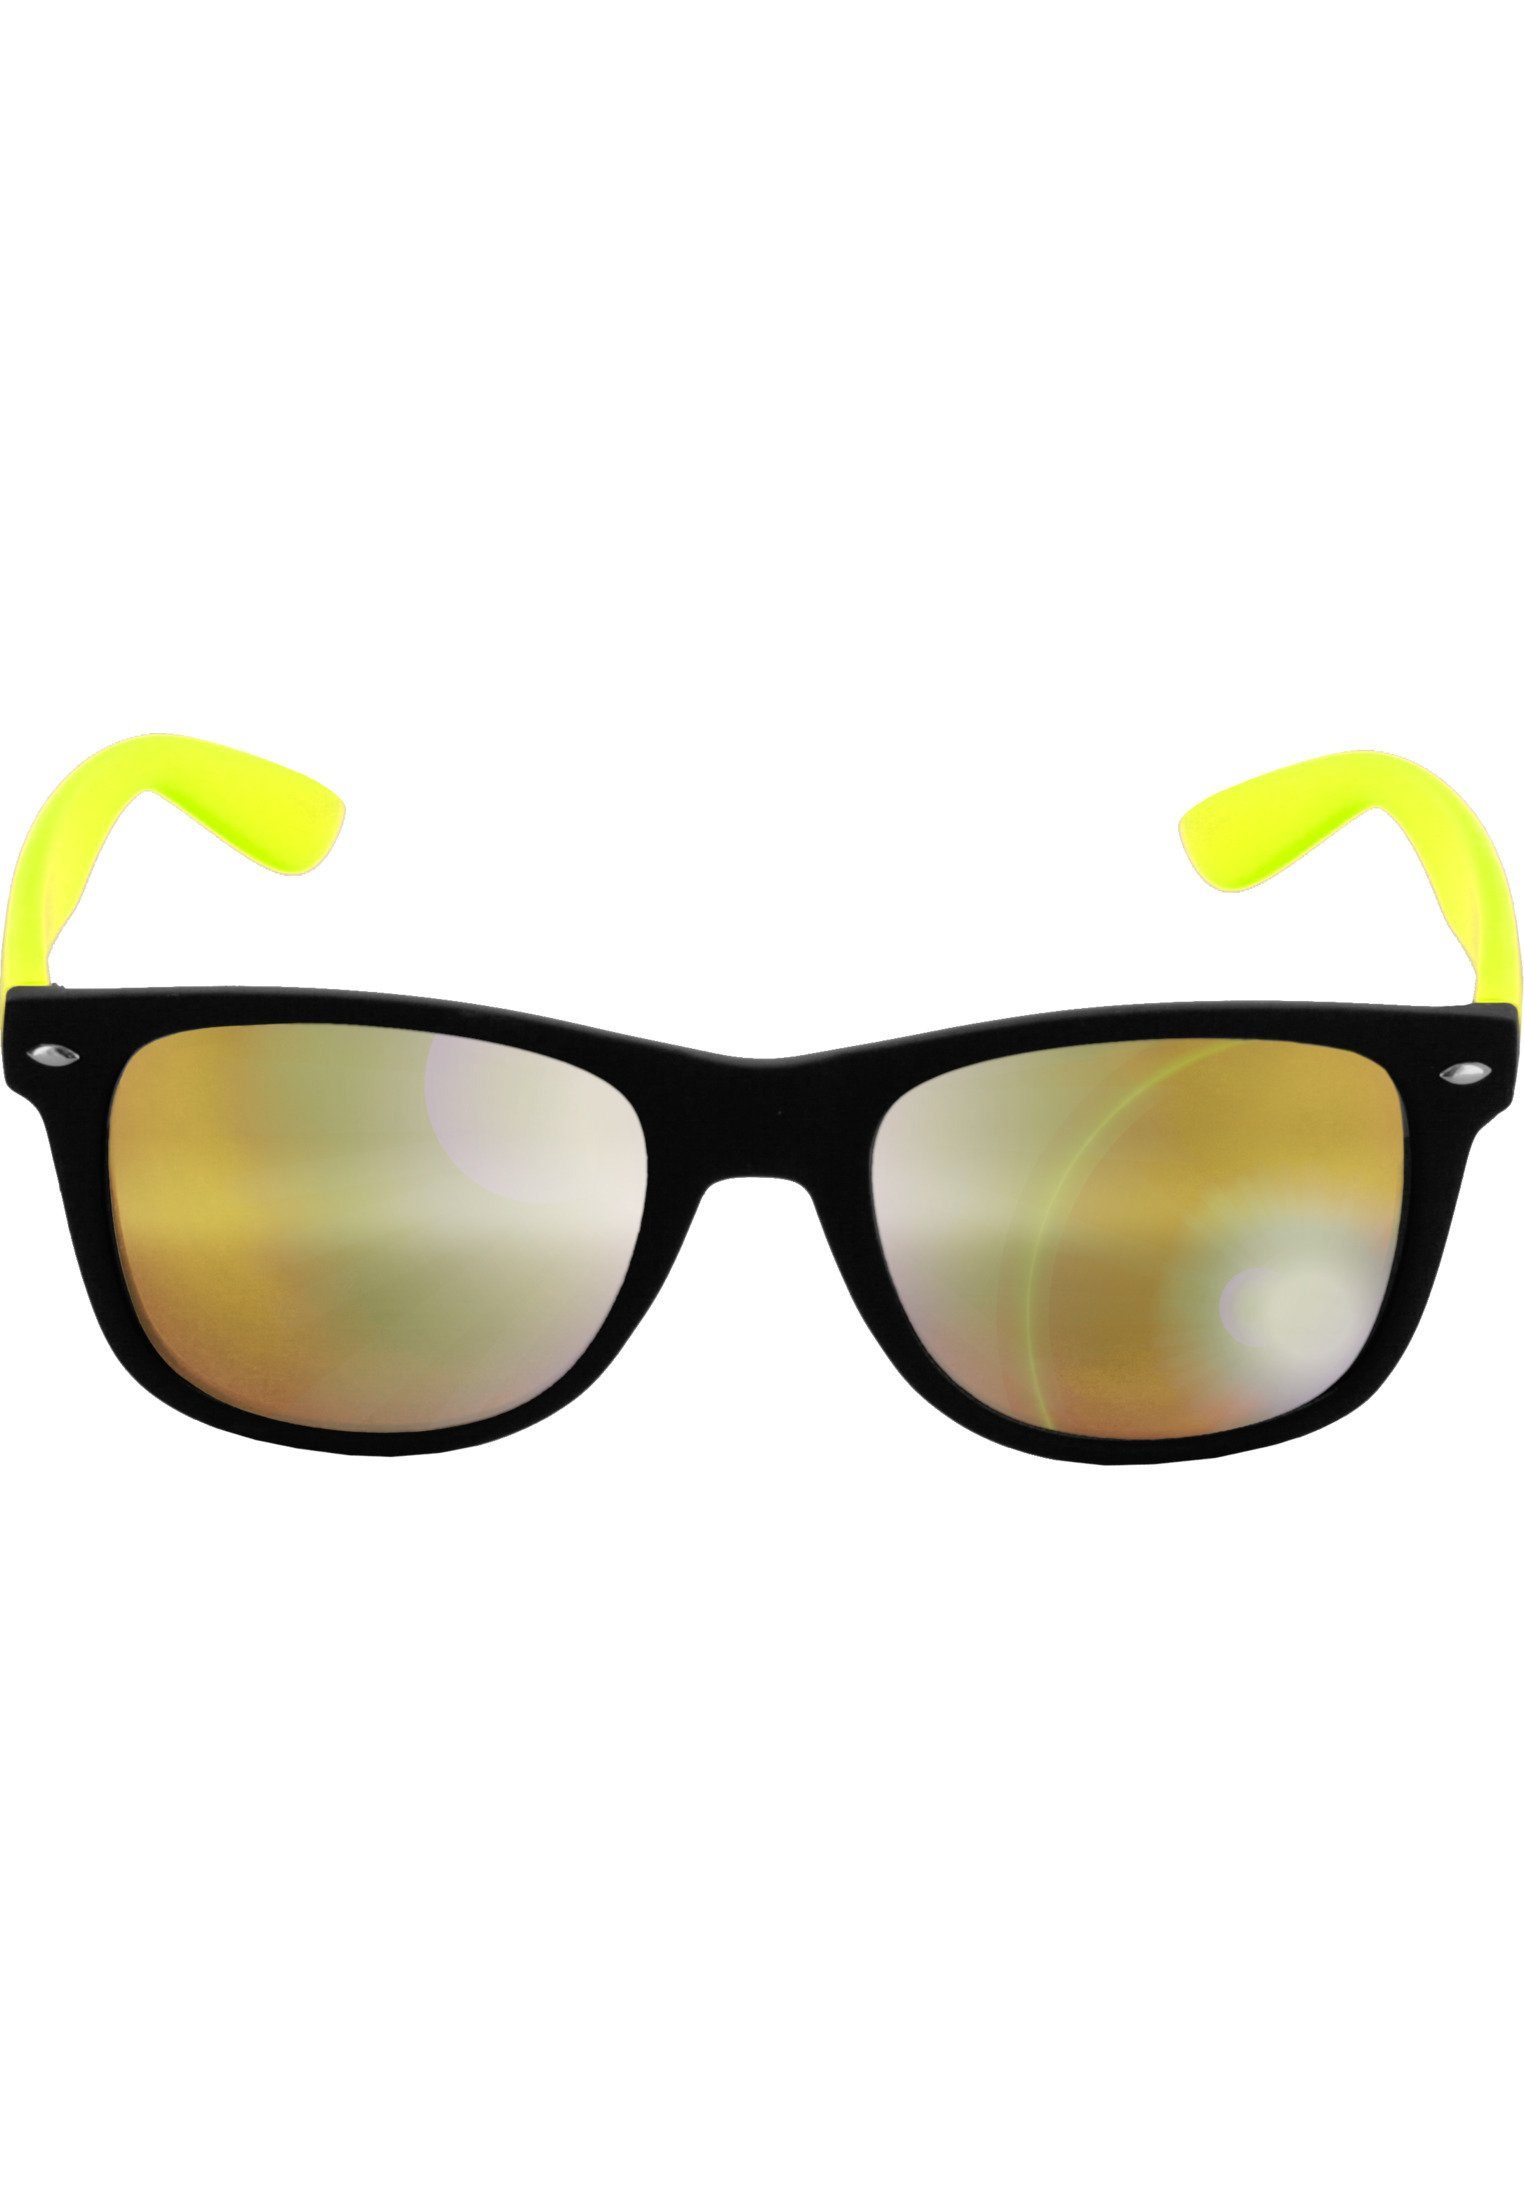 Mirror blk/ylw/ylw MSTRDS Accessoires Likoma Sonnenbrille Sunglasses